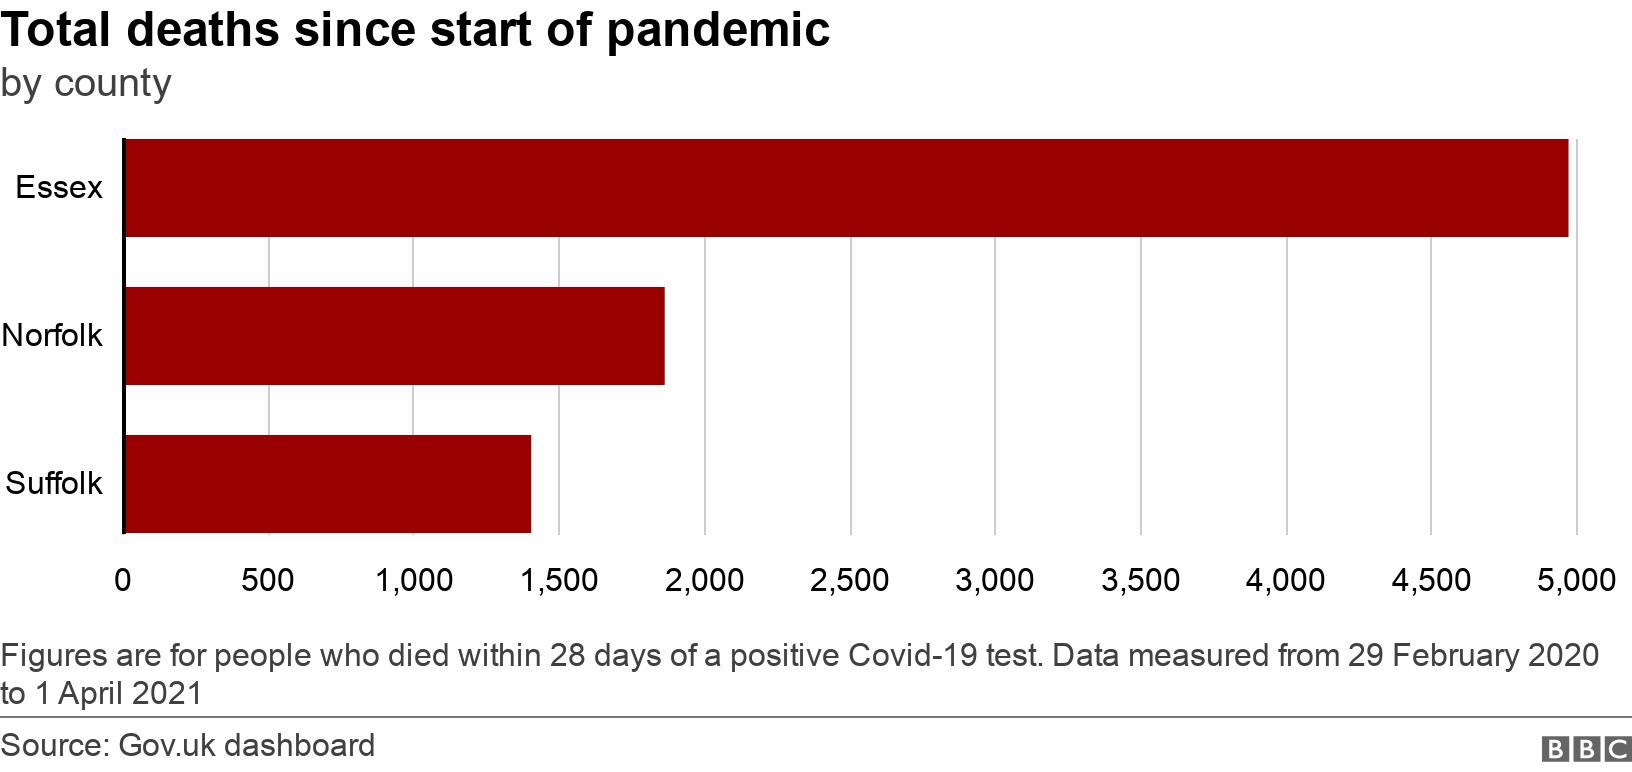 Total  deaths since start of pandemic. by county.  Figures are for people who died within 28 days of a positive Covid-19 test. Data measured from 29 February 2020 to 1 April 2021.